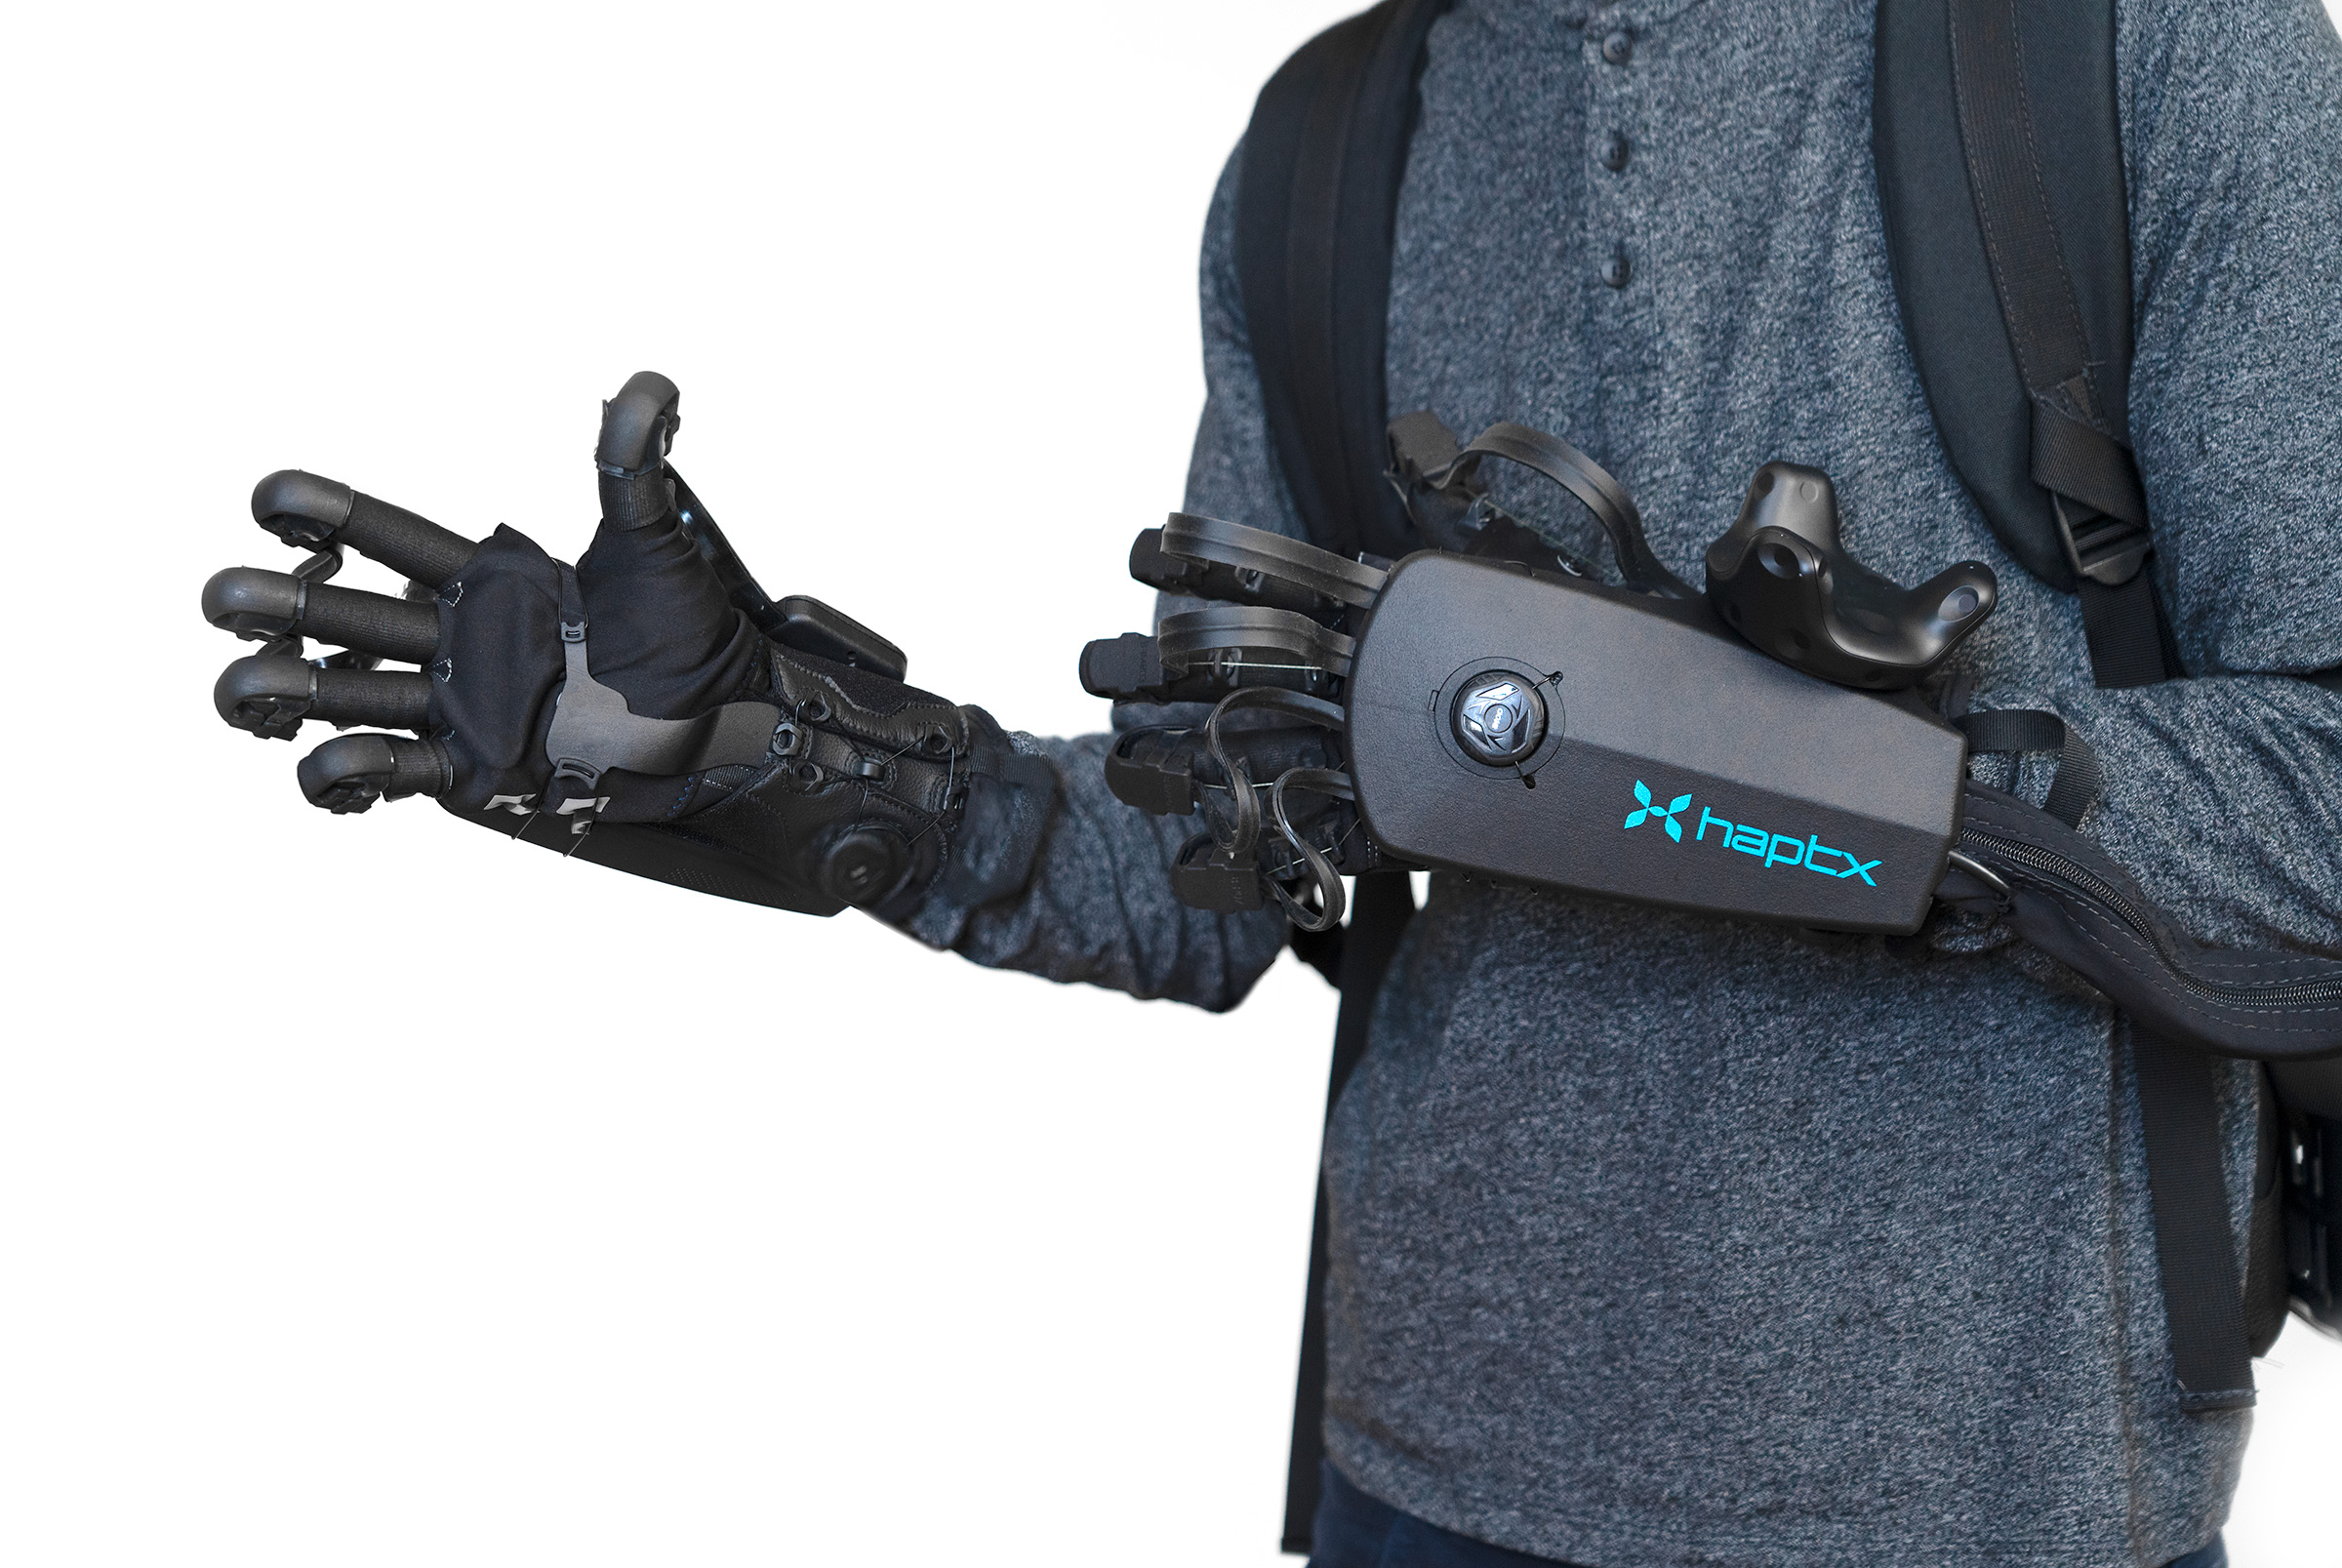 HaptX Launches True-Contact Haptic Gloves For VR And Robotics - VRScout